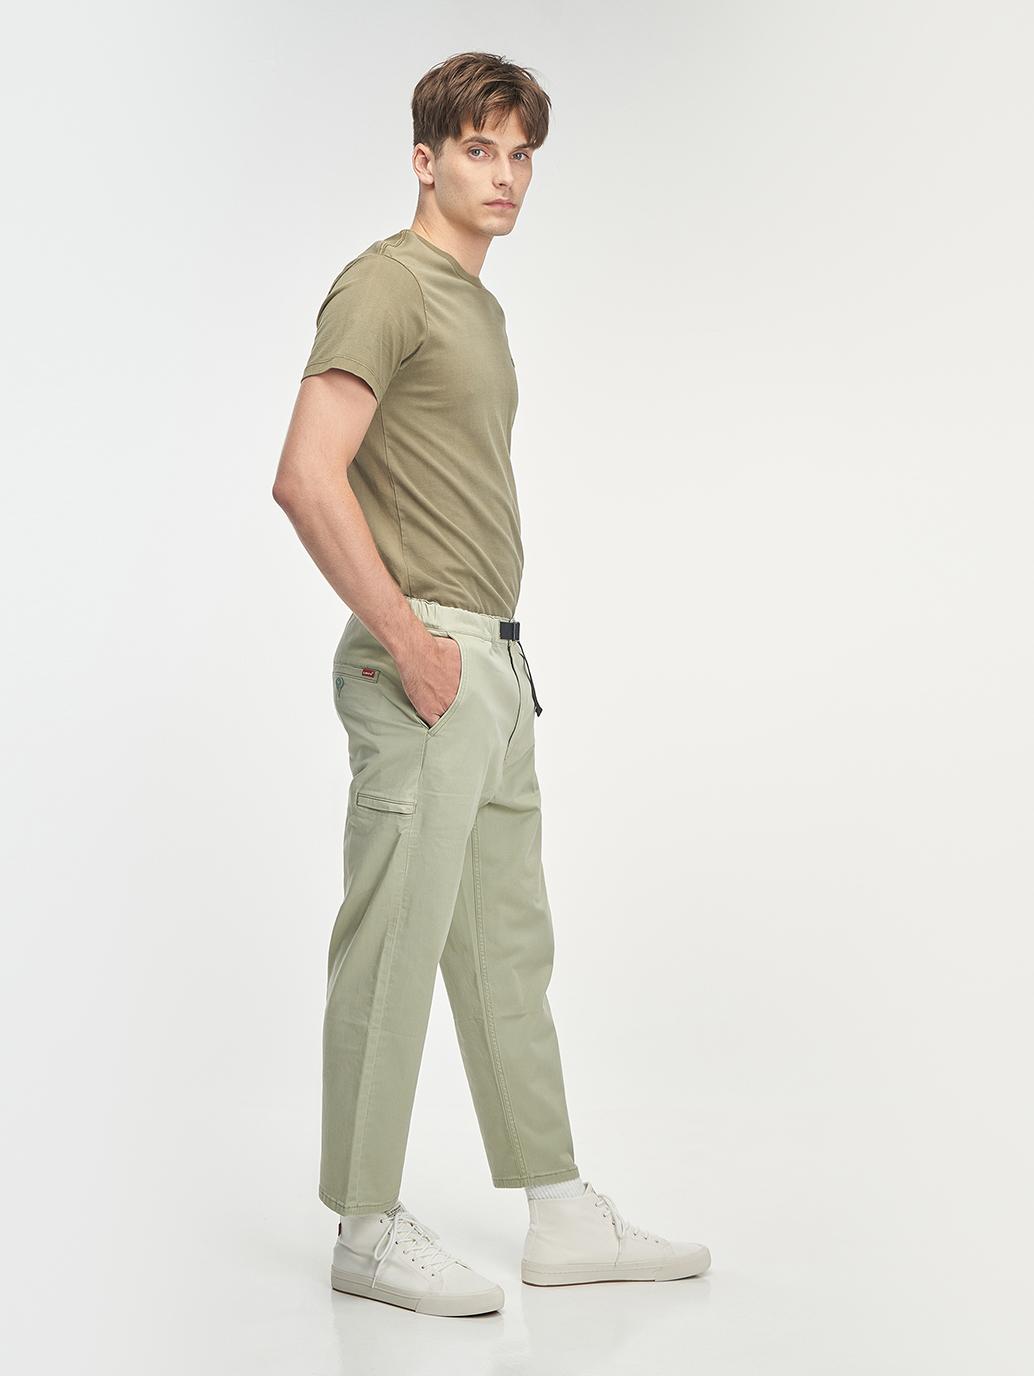 levis malaysia mens crop utility chino A10450001 03 Side